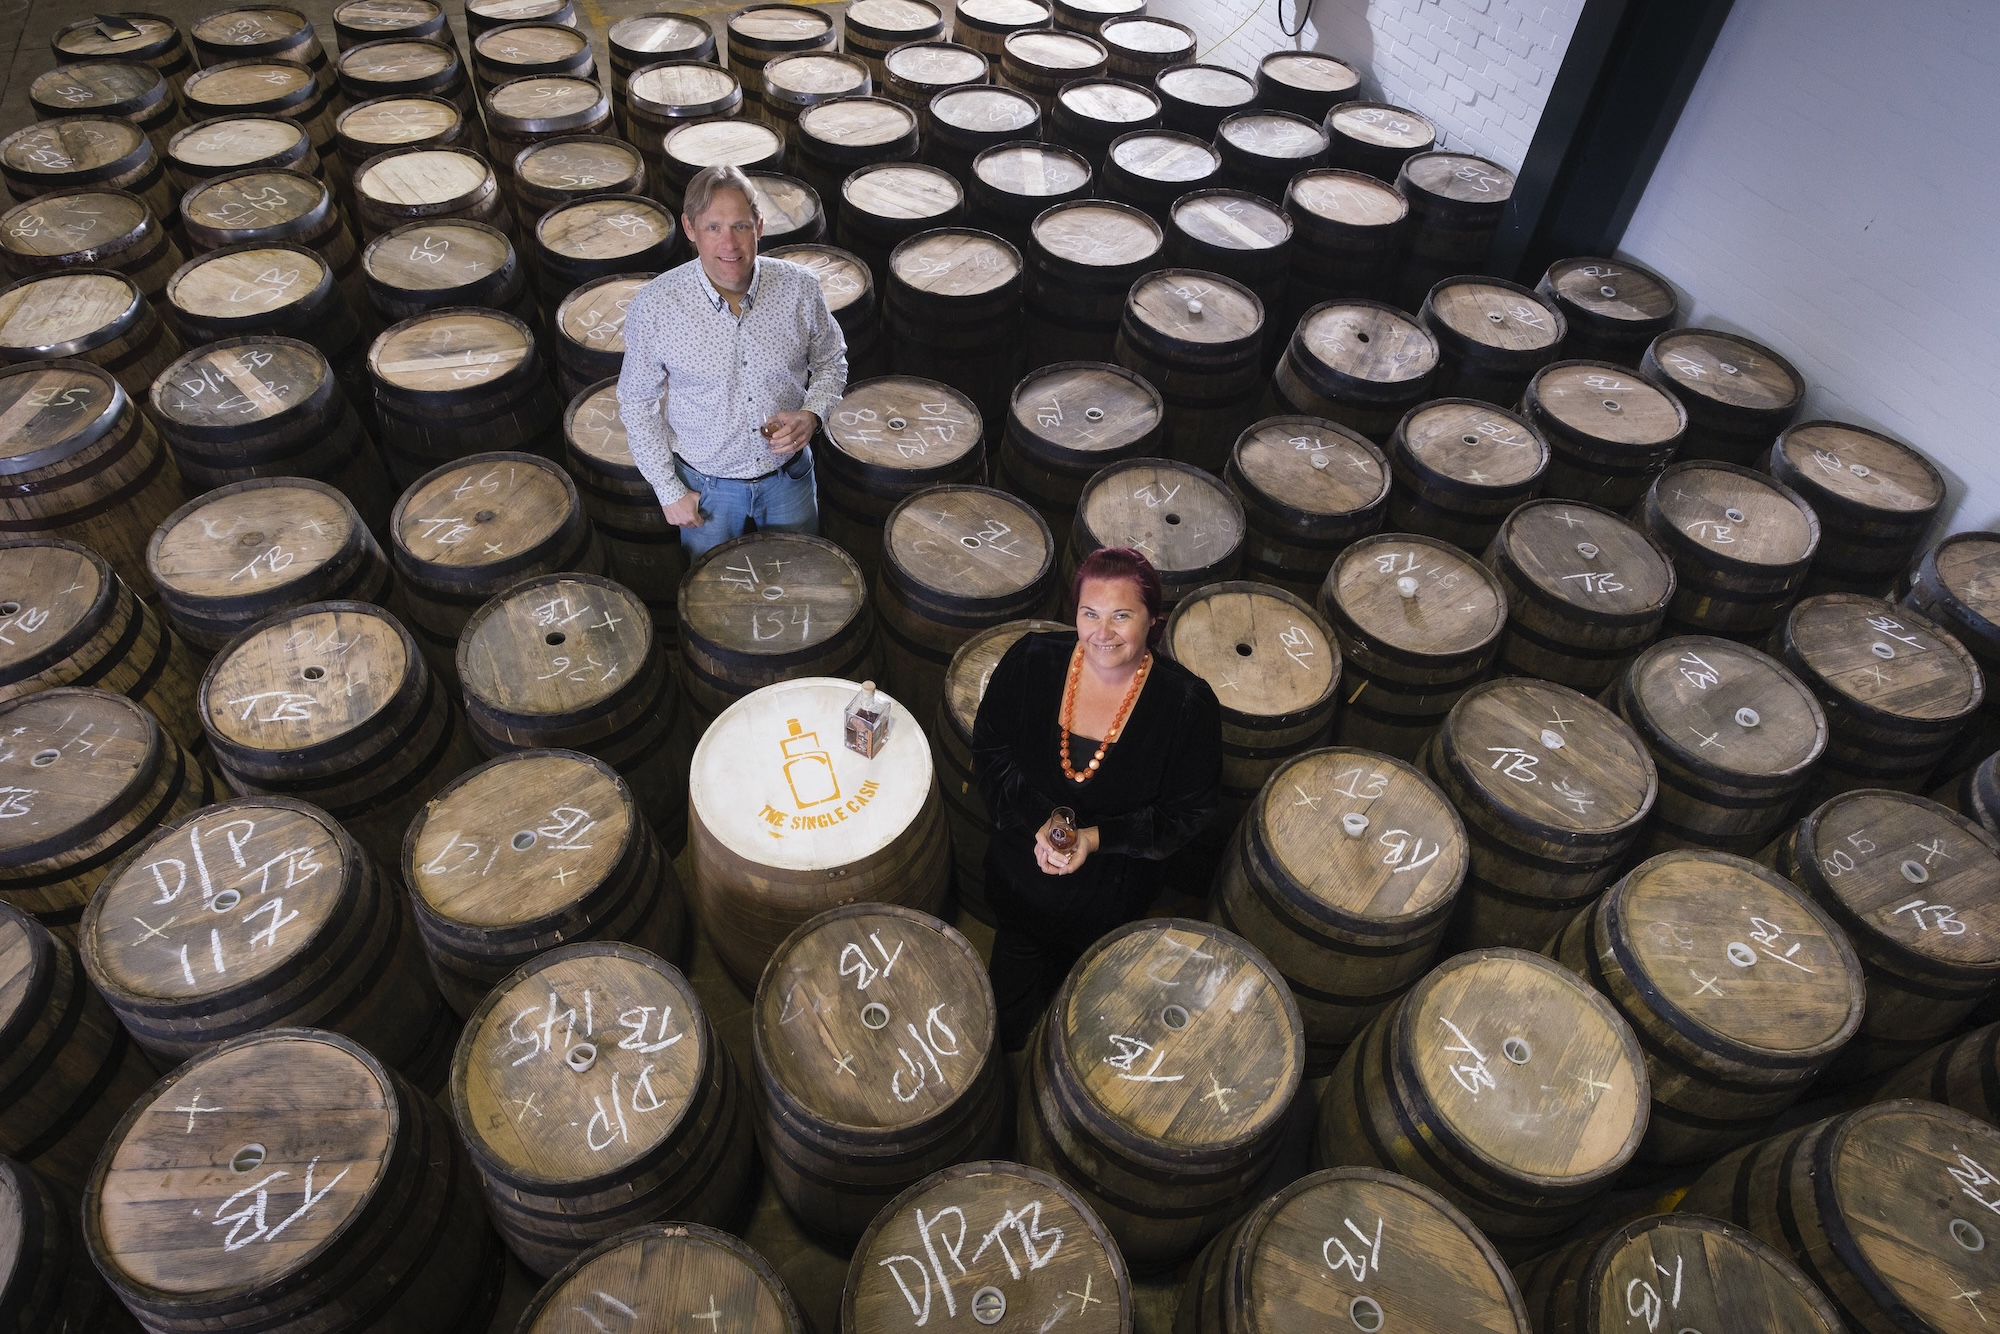 Whisky bottler appoints marketing and strategy leads